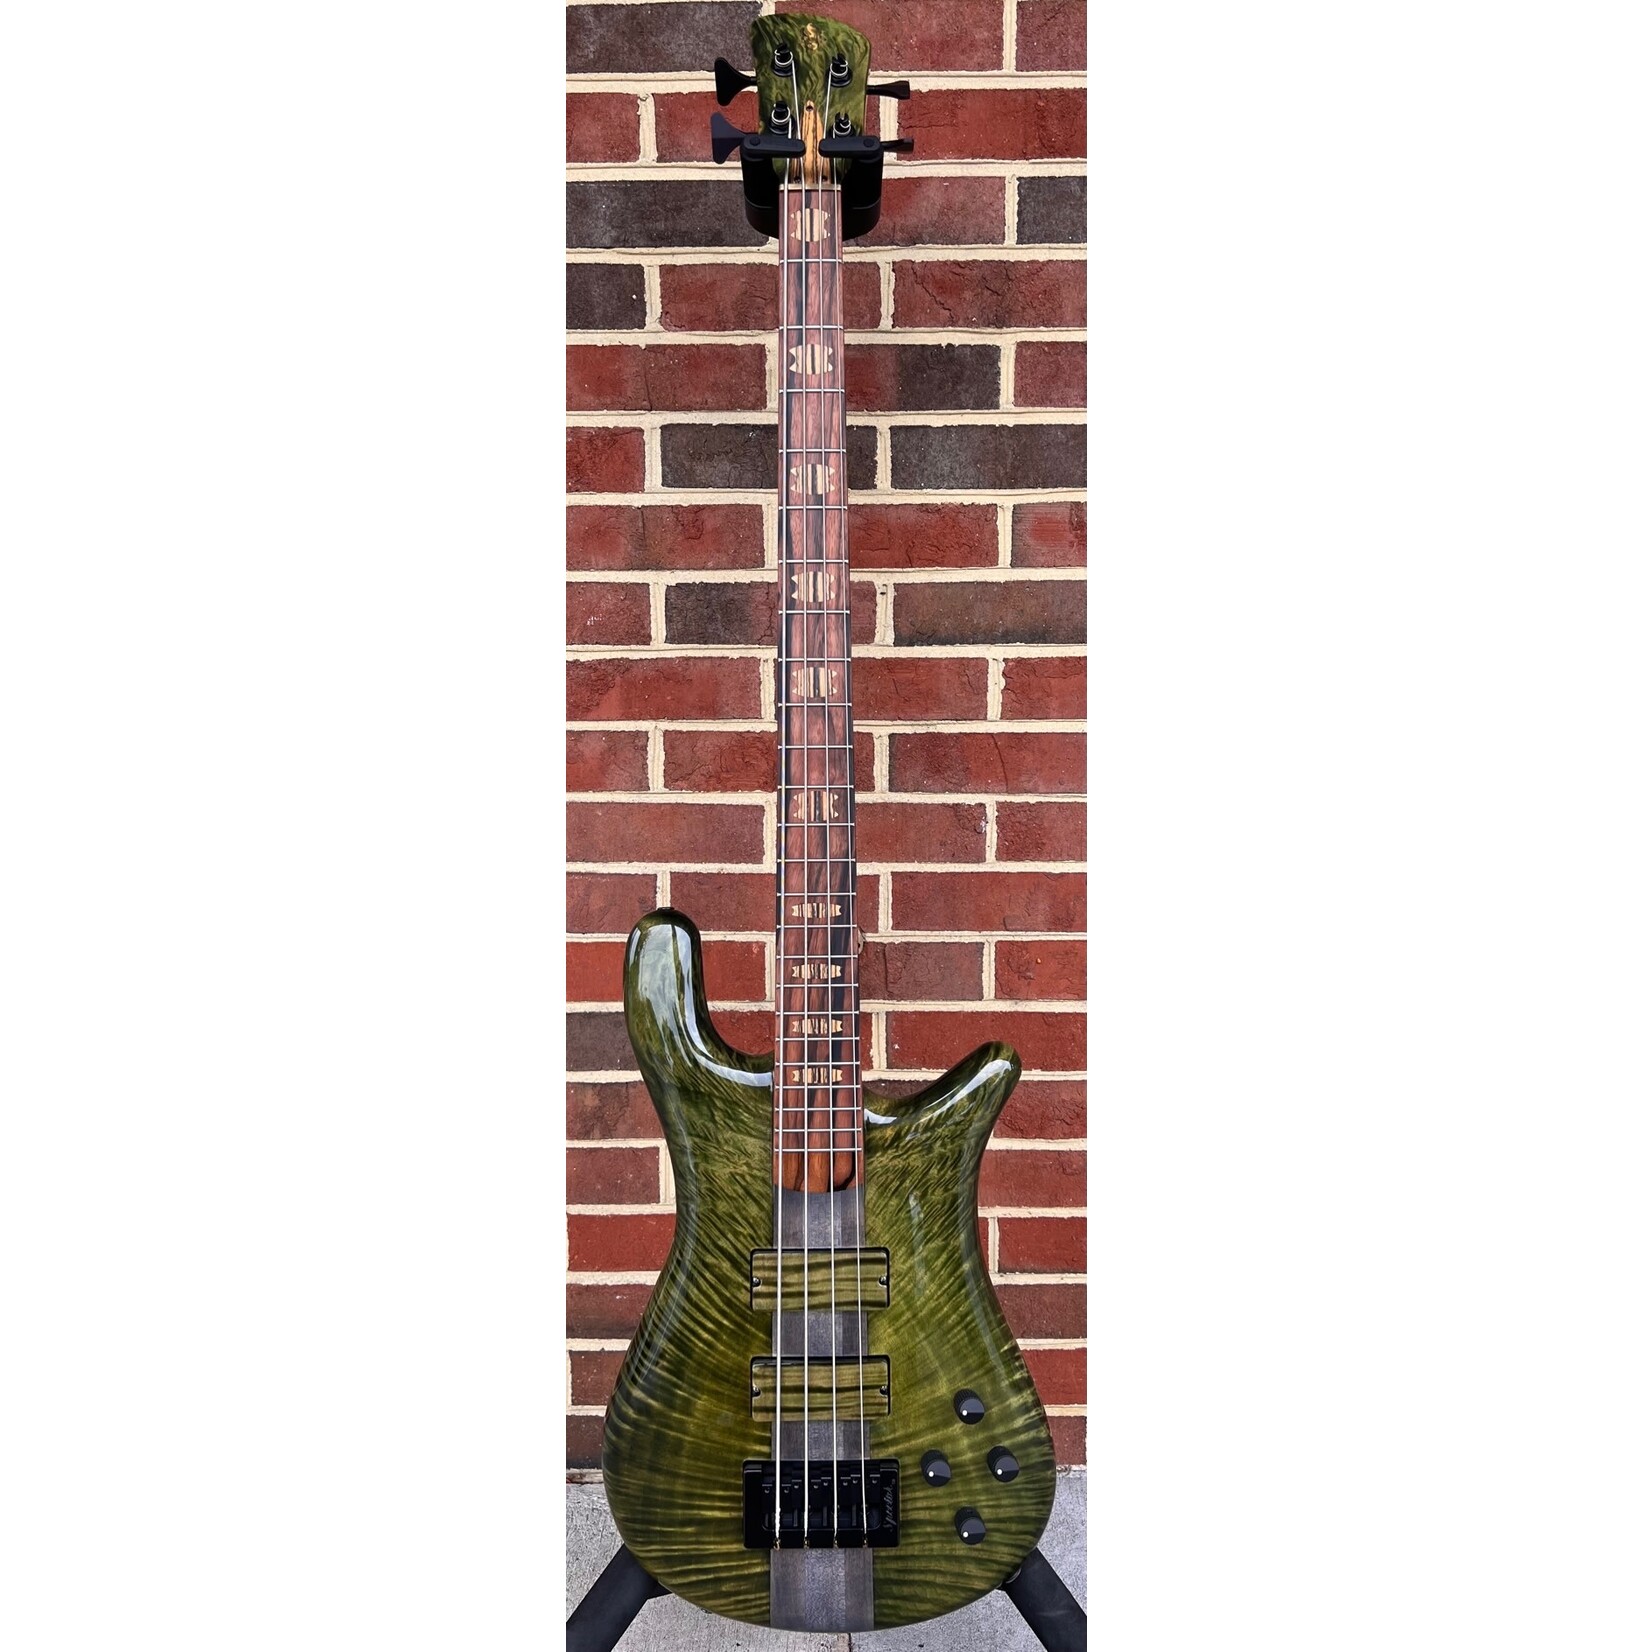 Spector Spector USA NS-2, The Music Loft 30th Anniversary, Flame Maple Top, Envy Green Gloss, 3pc Maple Neck (Matte Finish), Charcoal Stained Neck, Macassar Ebony Fretboard, Pale Moon Ebony Inlays, EMG 35DCX Pickups, HAZ 9v Preamp, TSA Case